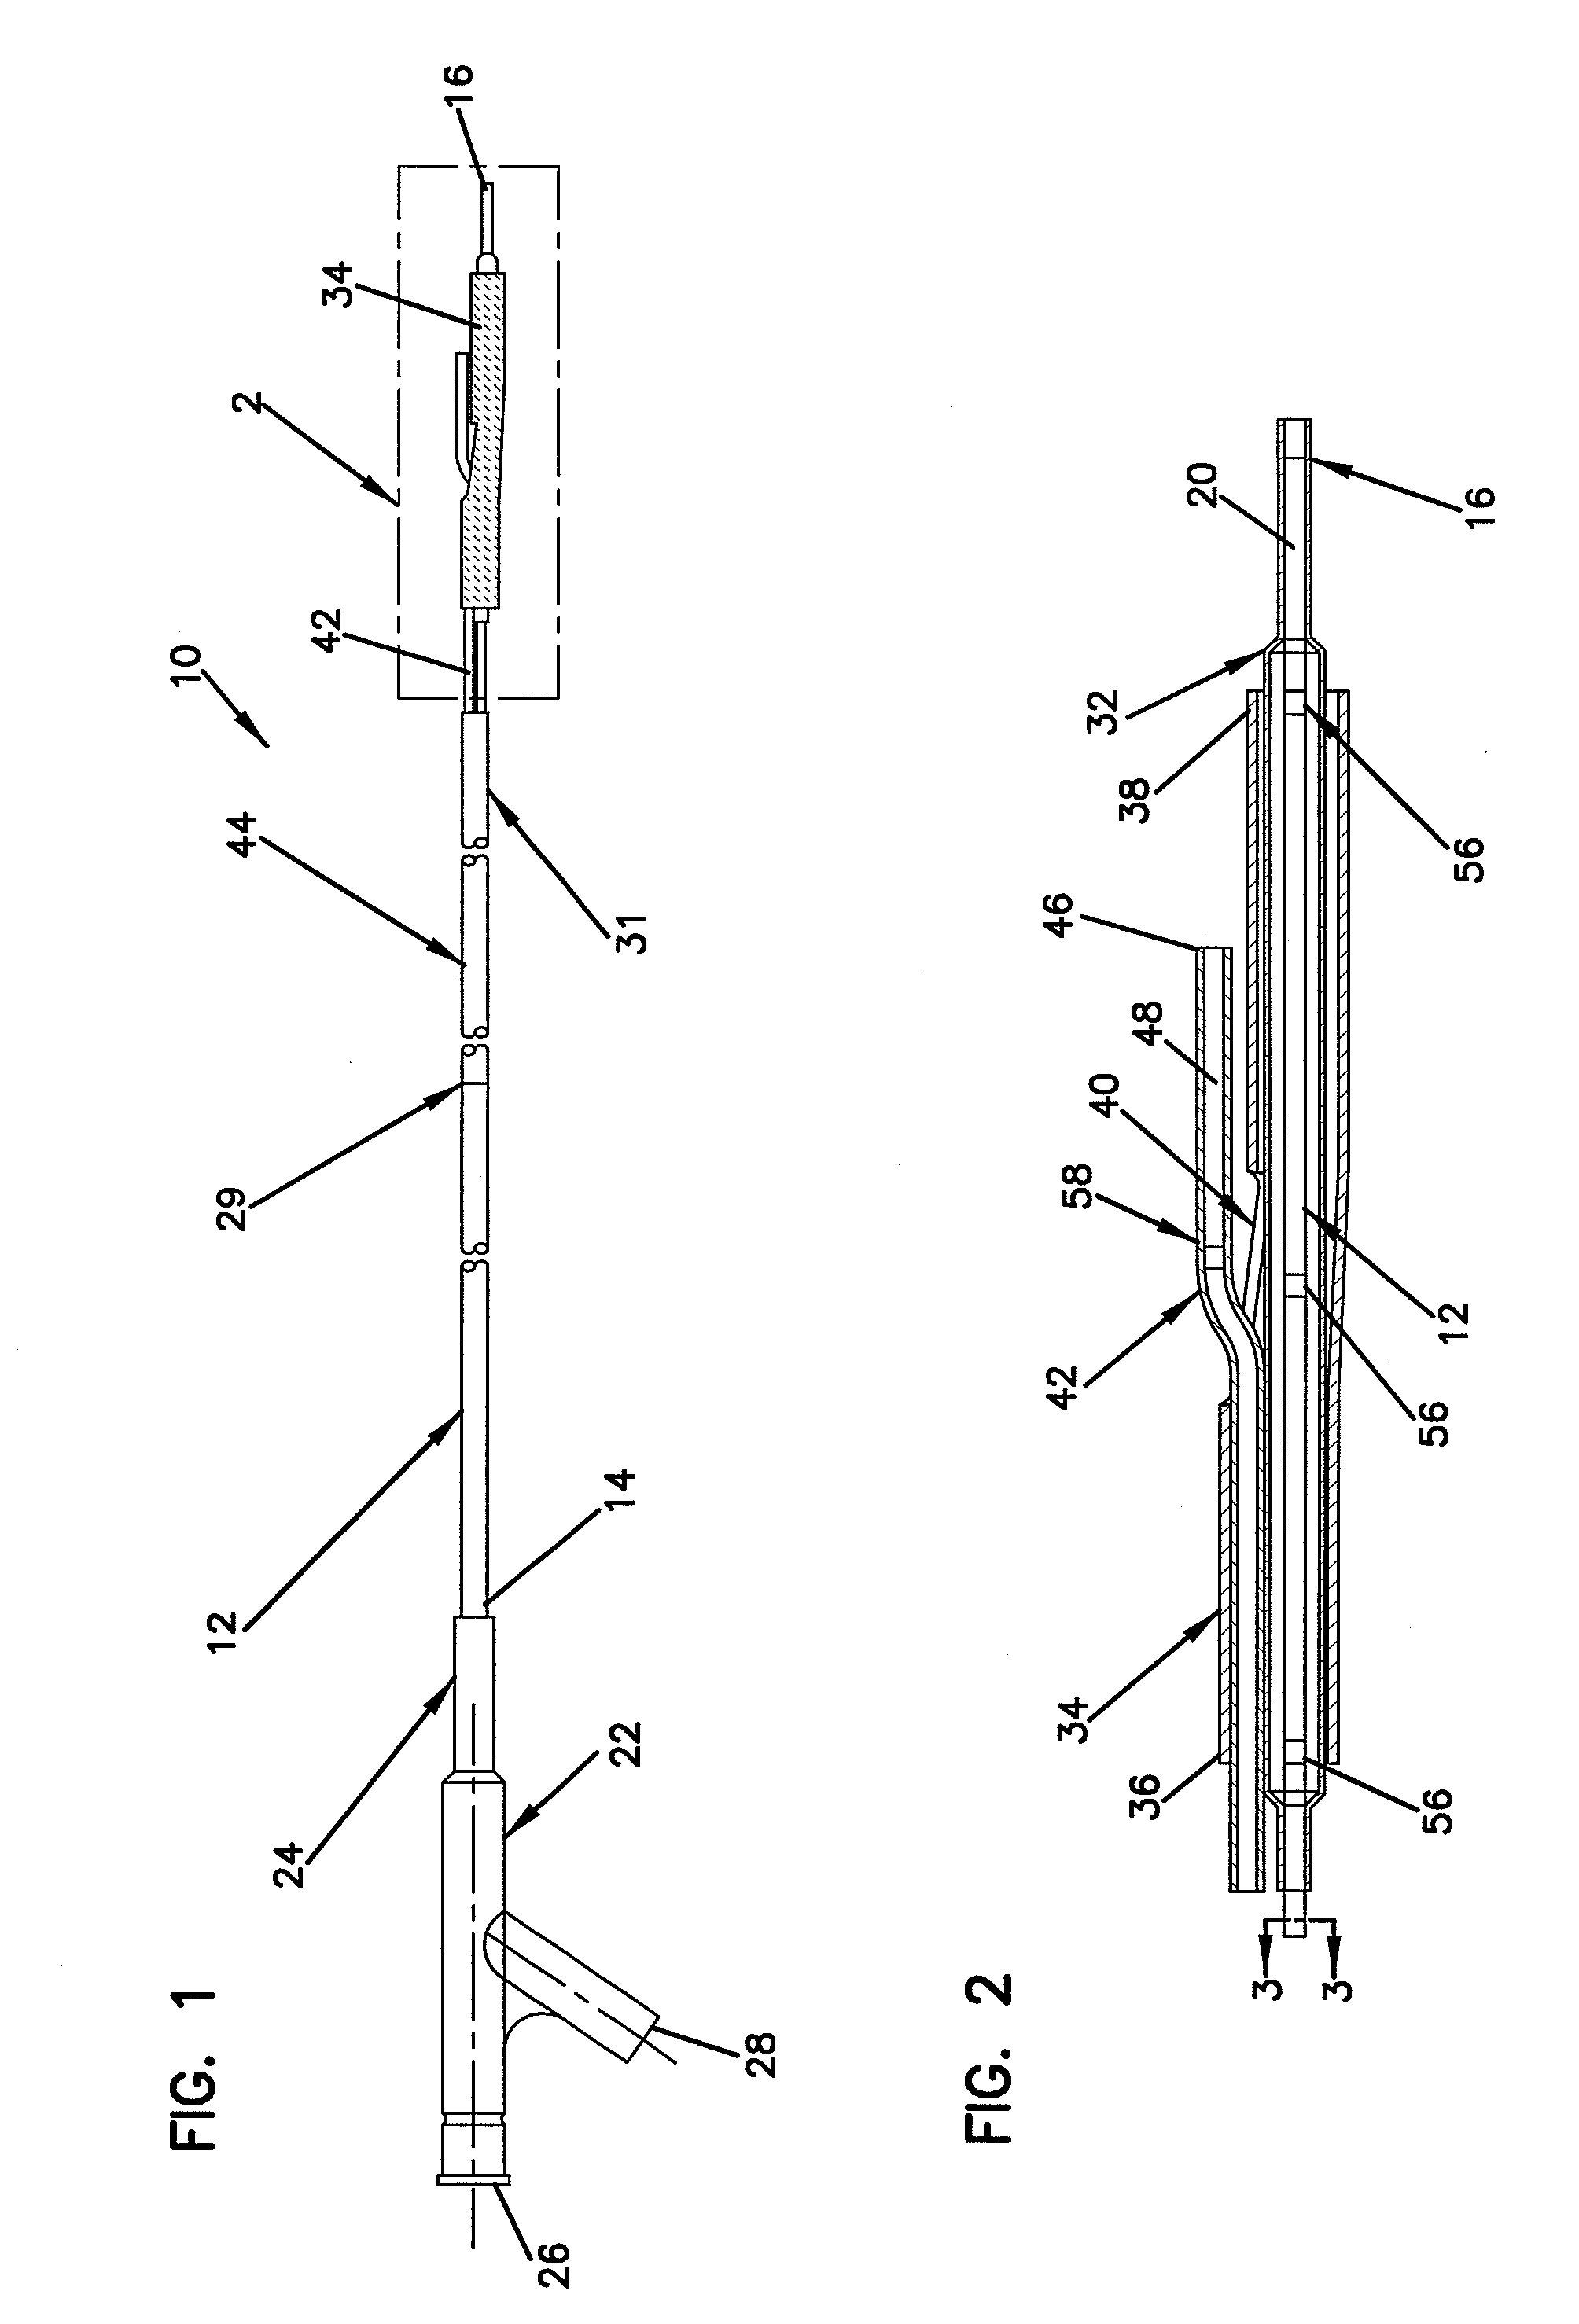 Short sleeve stent delivery catheter and methods